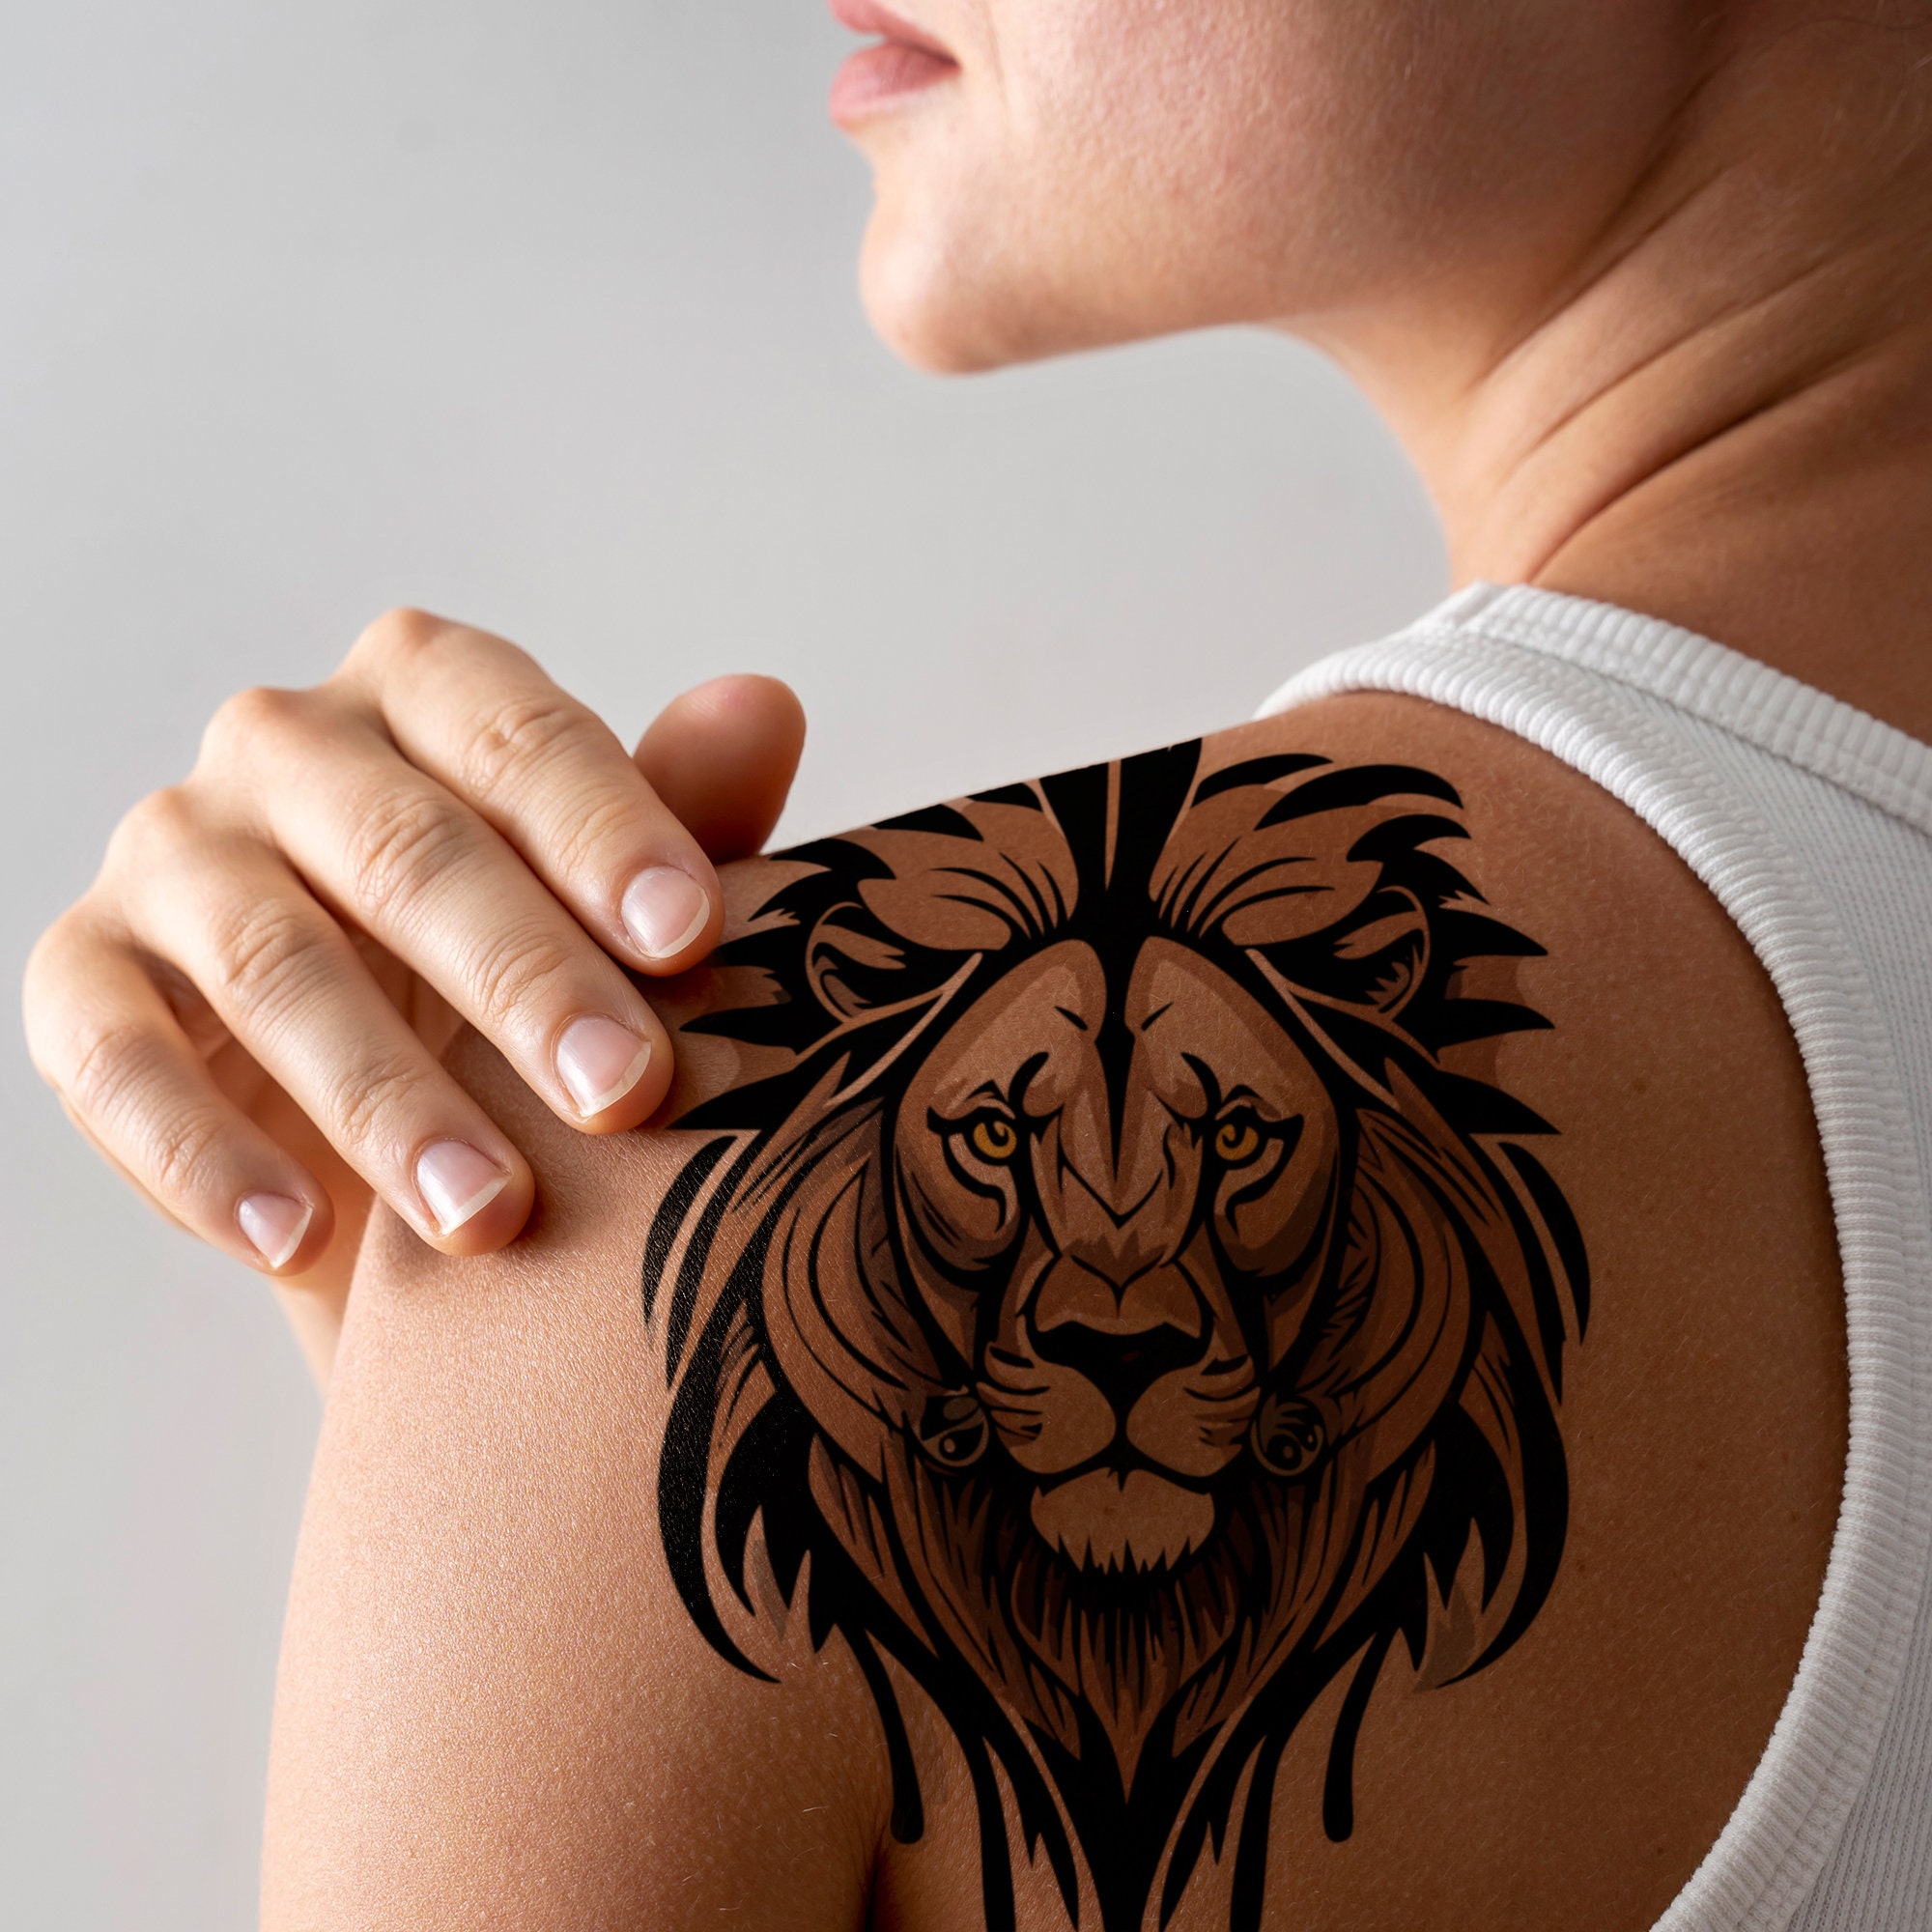 Buy Lion Tribal Tattoo Online In India - Etsy India